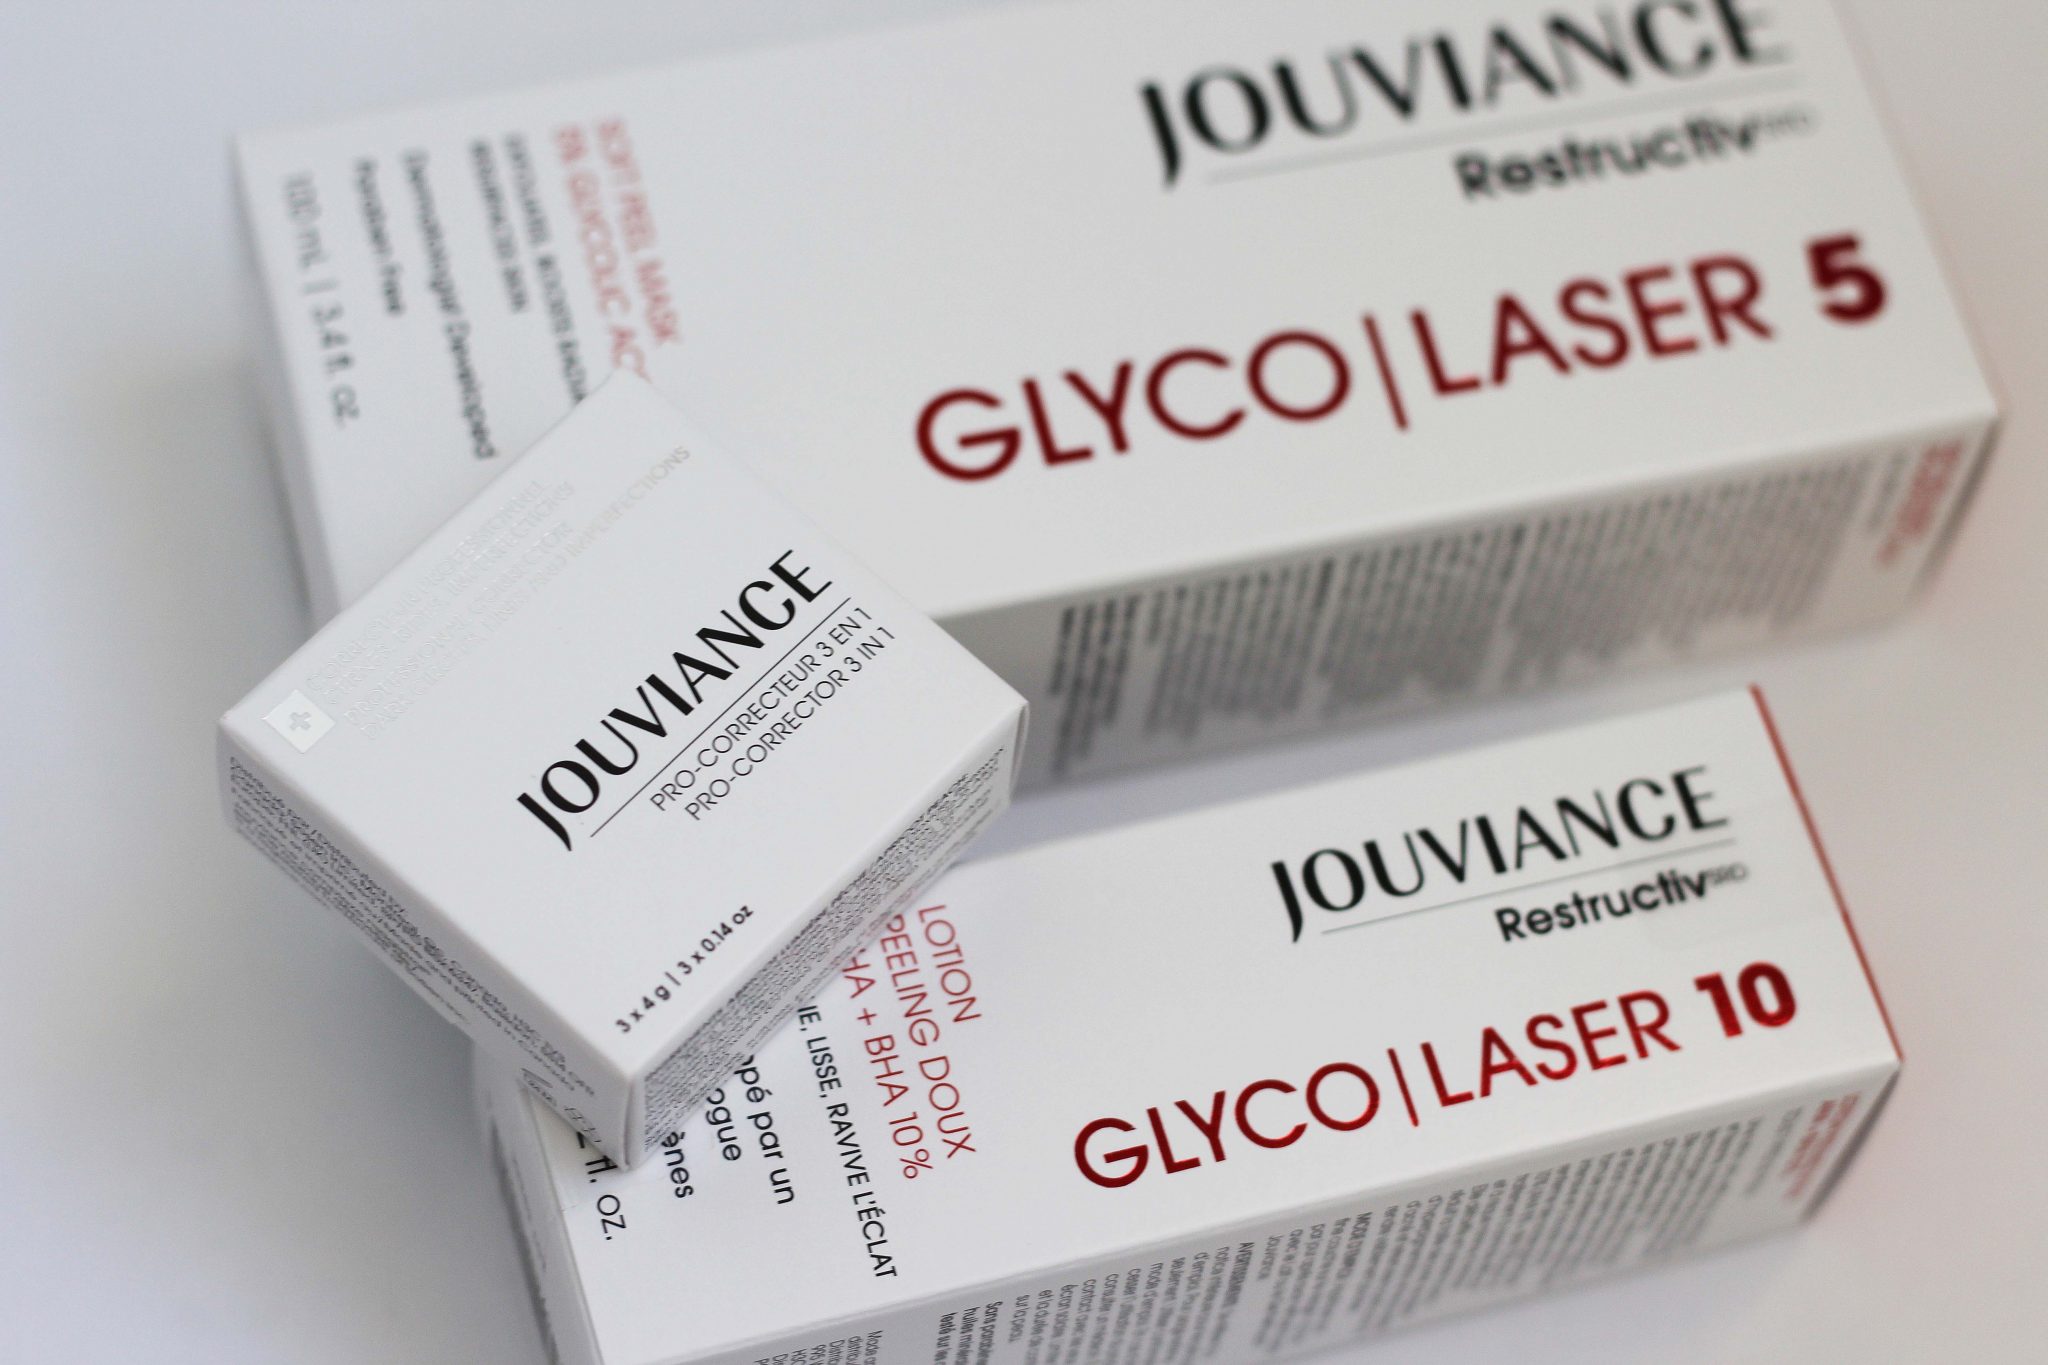 My Review of the Jouviance GlycoLaser Line